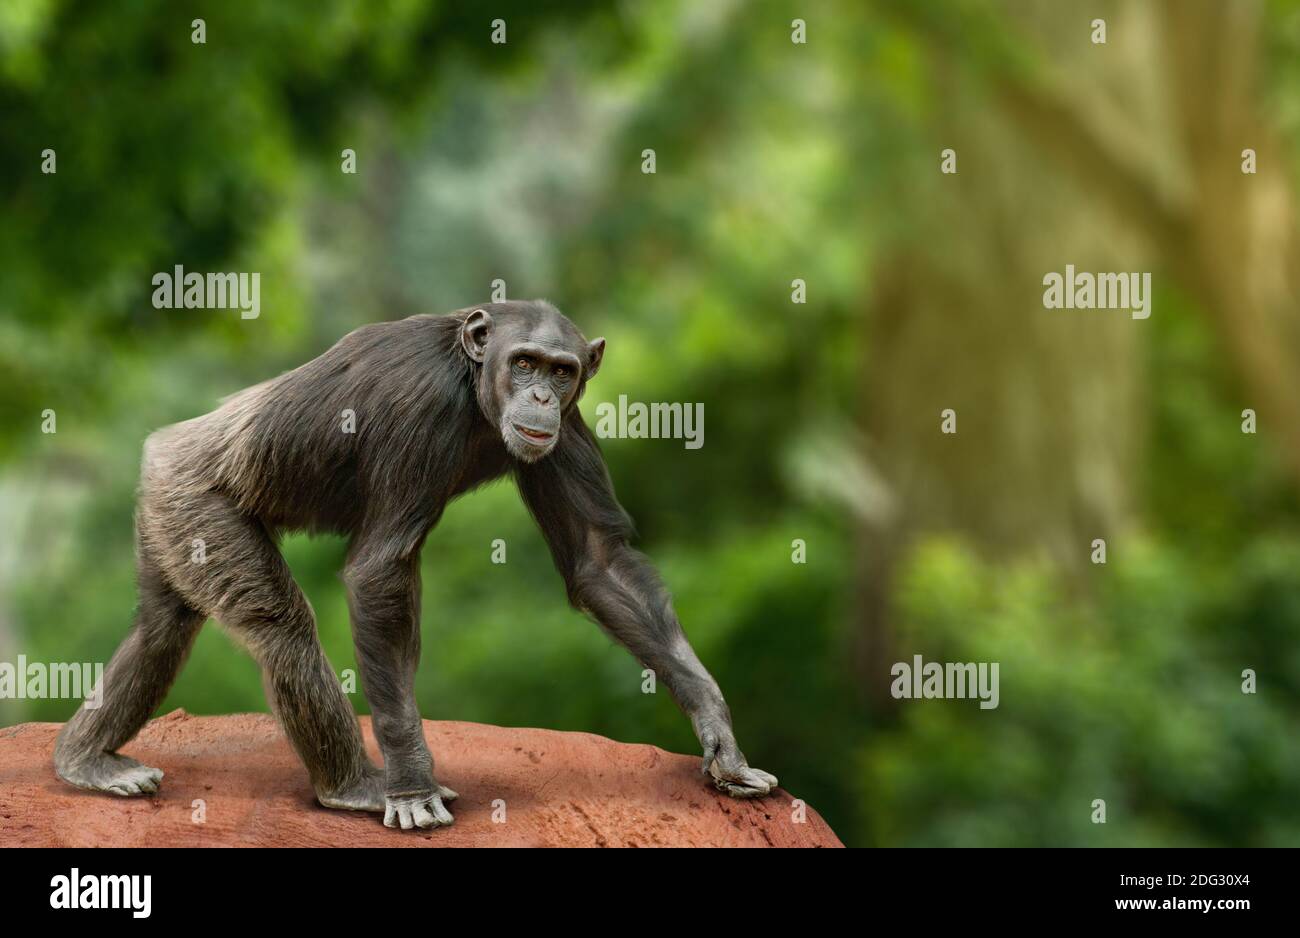 Ape chimpanzee female looking at camera, walking over a white background Stock Photo